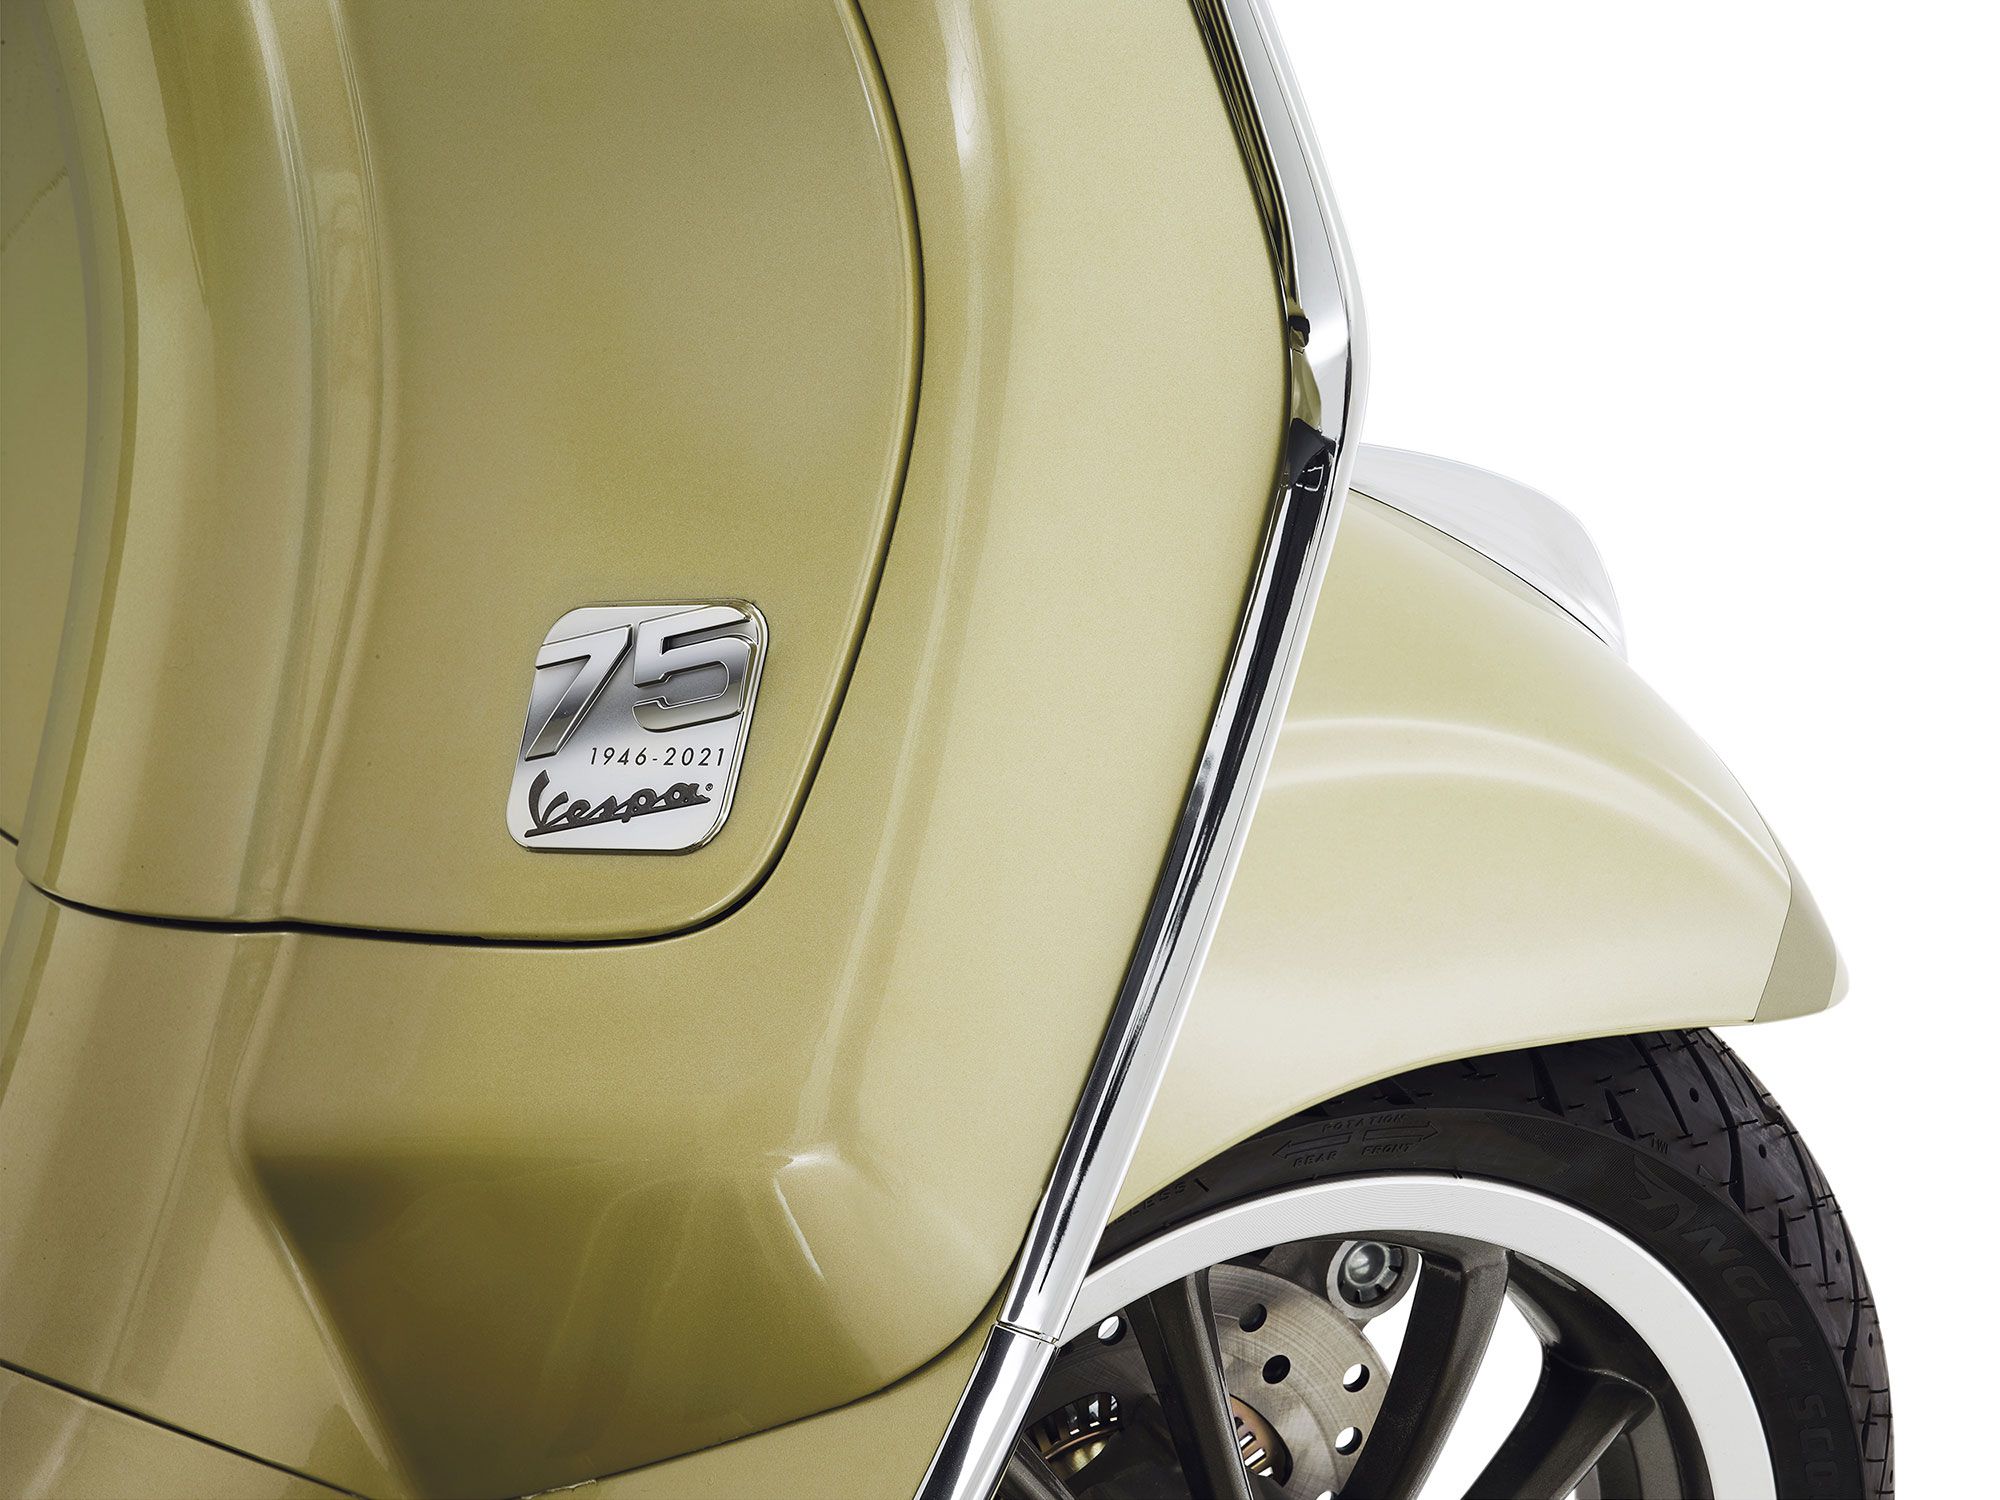 The Primavera and GTS anniversary editions will come with special badging to mark the occasion.